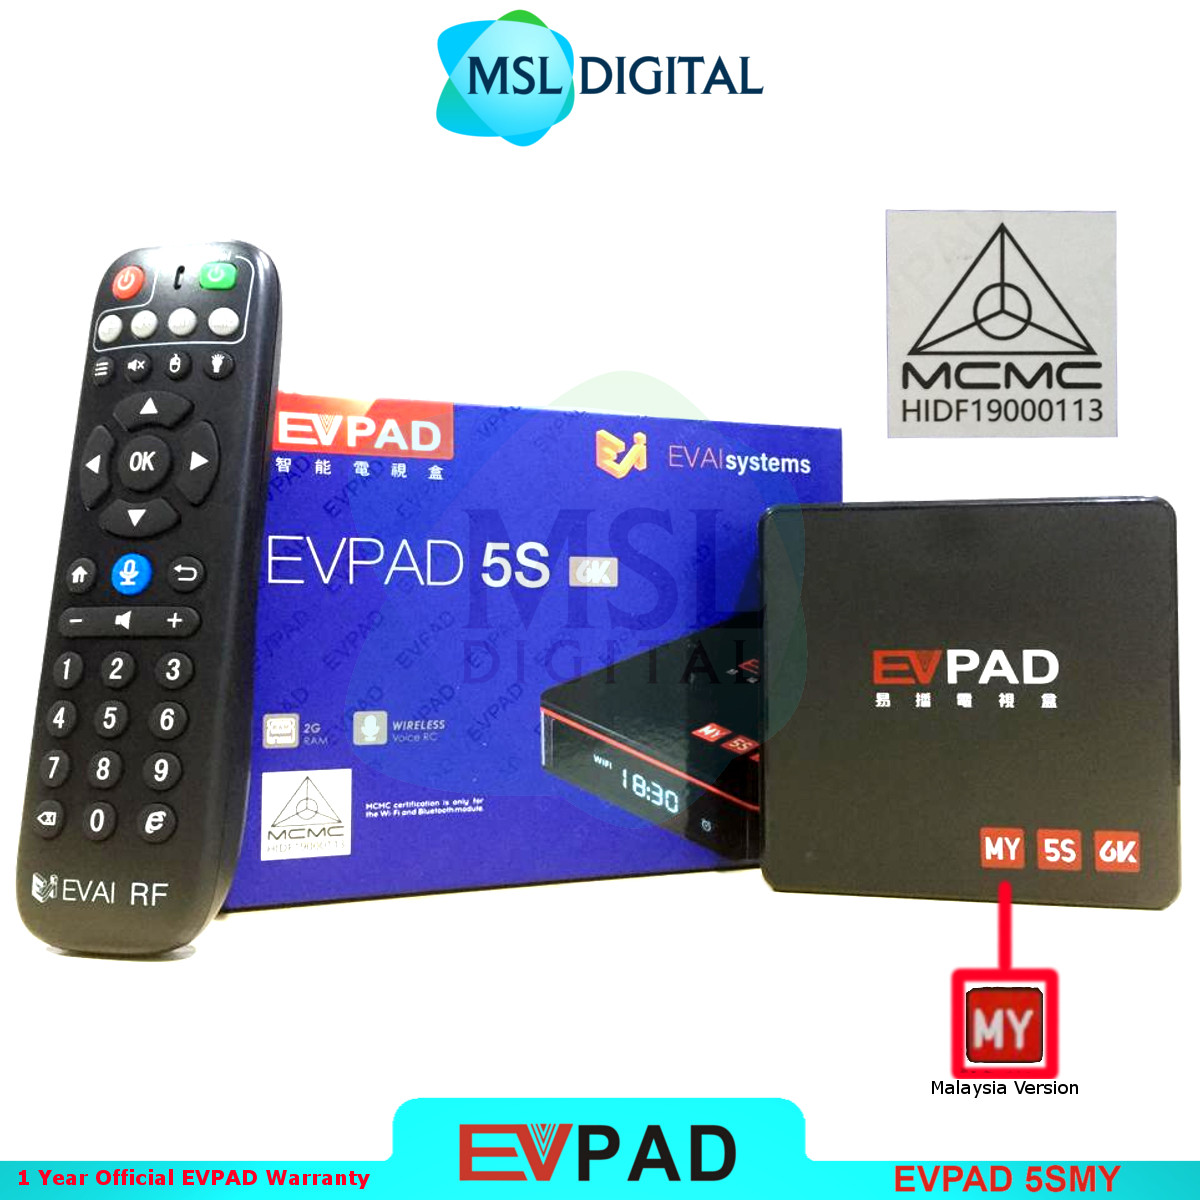 EVPAD 5S MY 2+16GB ANDROID TV BX (1 Year Official Warranty Evpad Malaysia  set) - MSL Digital Online Store